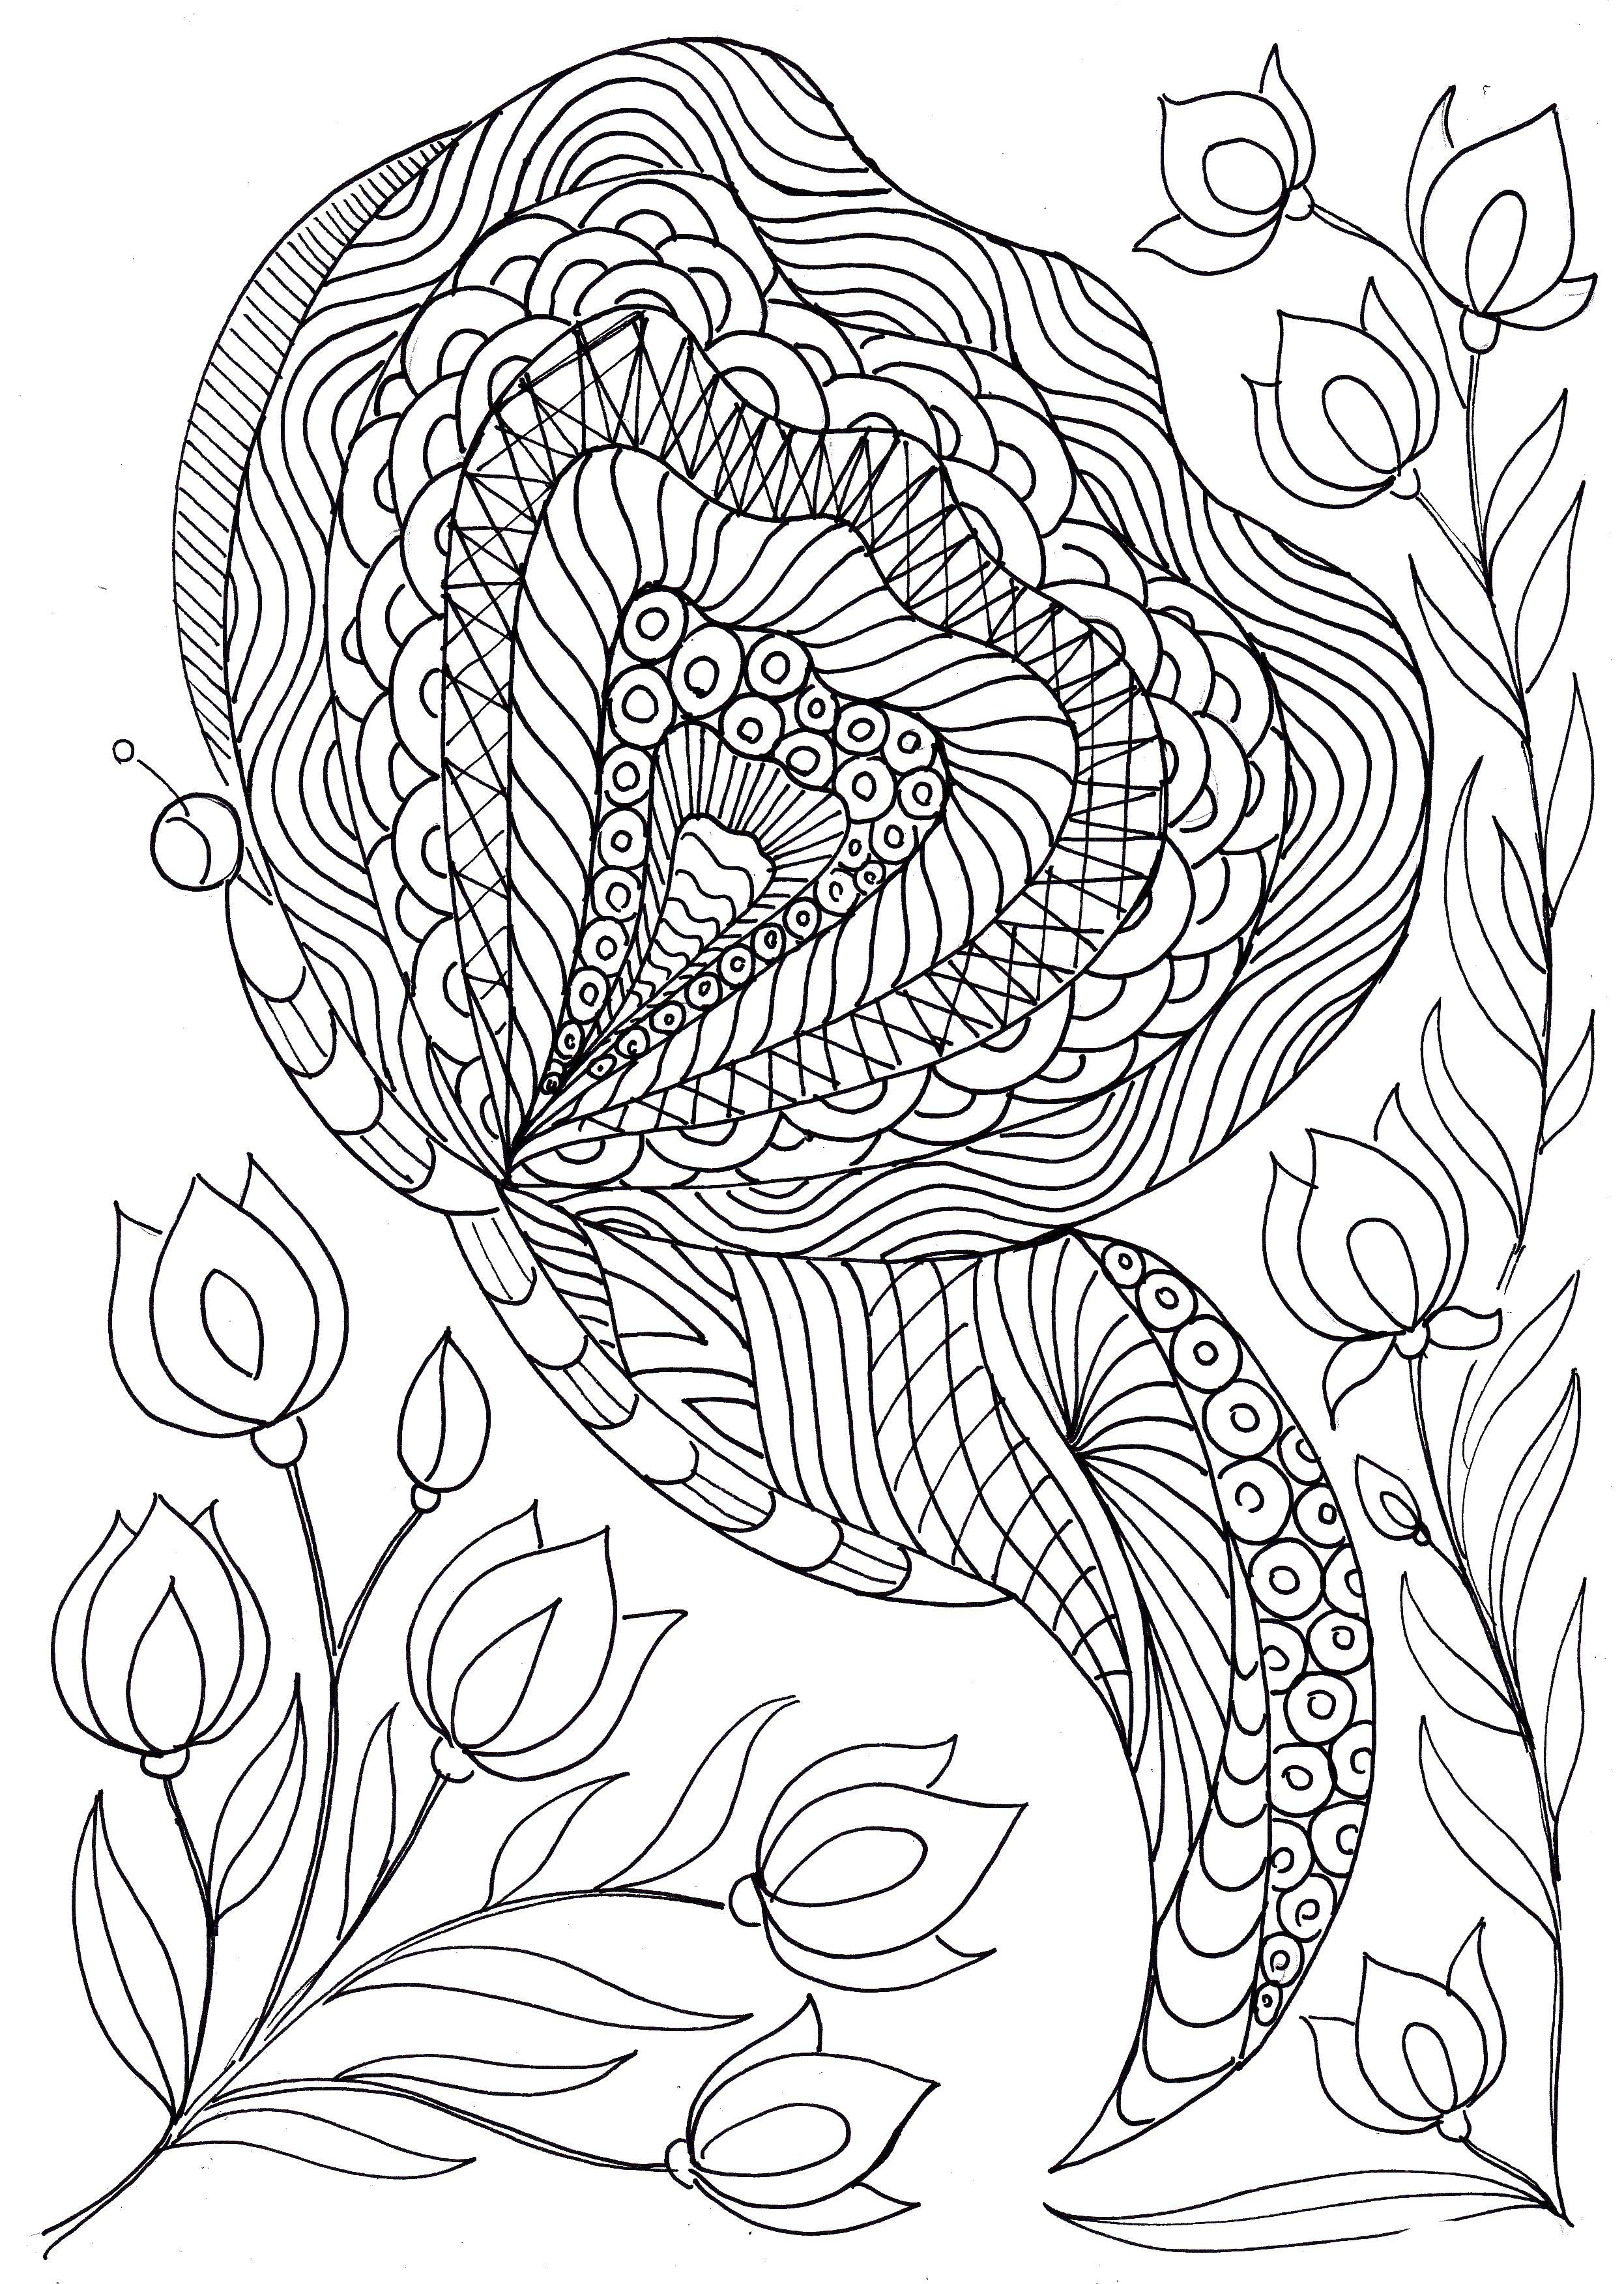 Coloring Coloring butterfly-stress. Category coloring antistress. Tags:  coloring, de-stressing, butterfly.